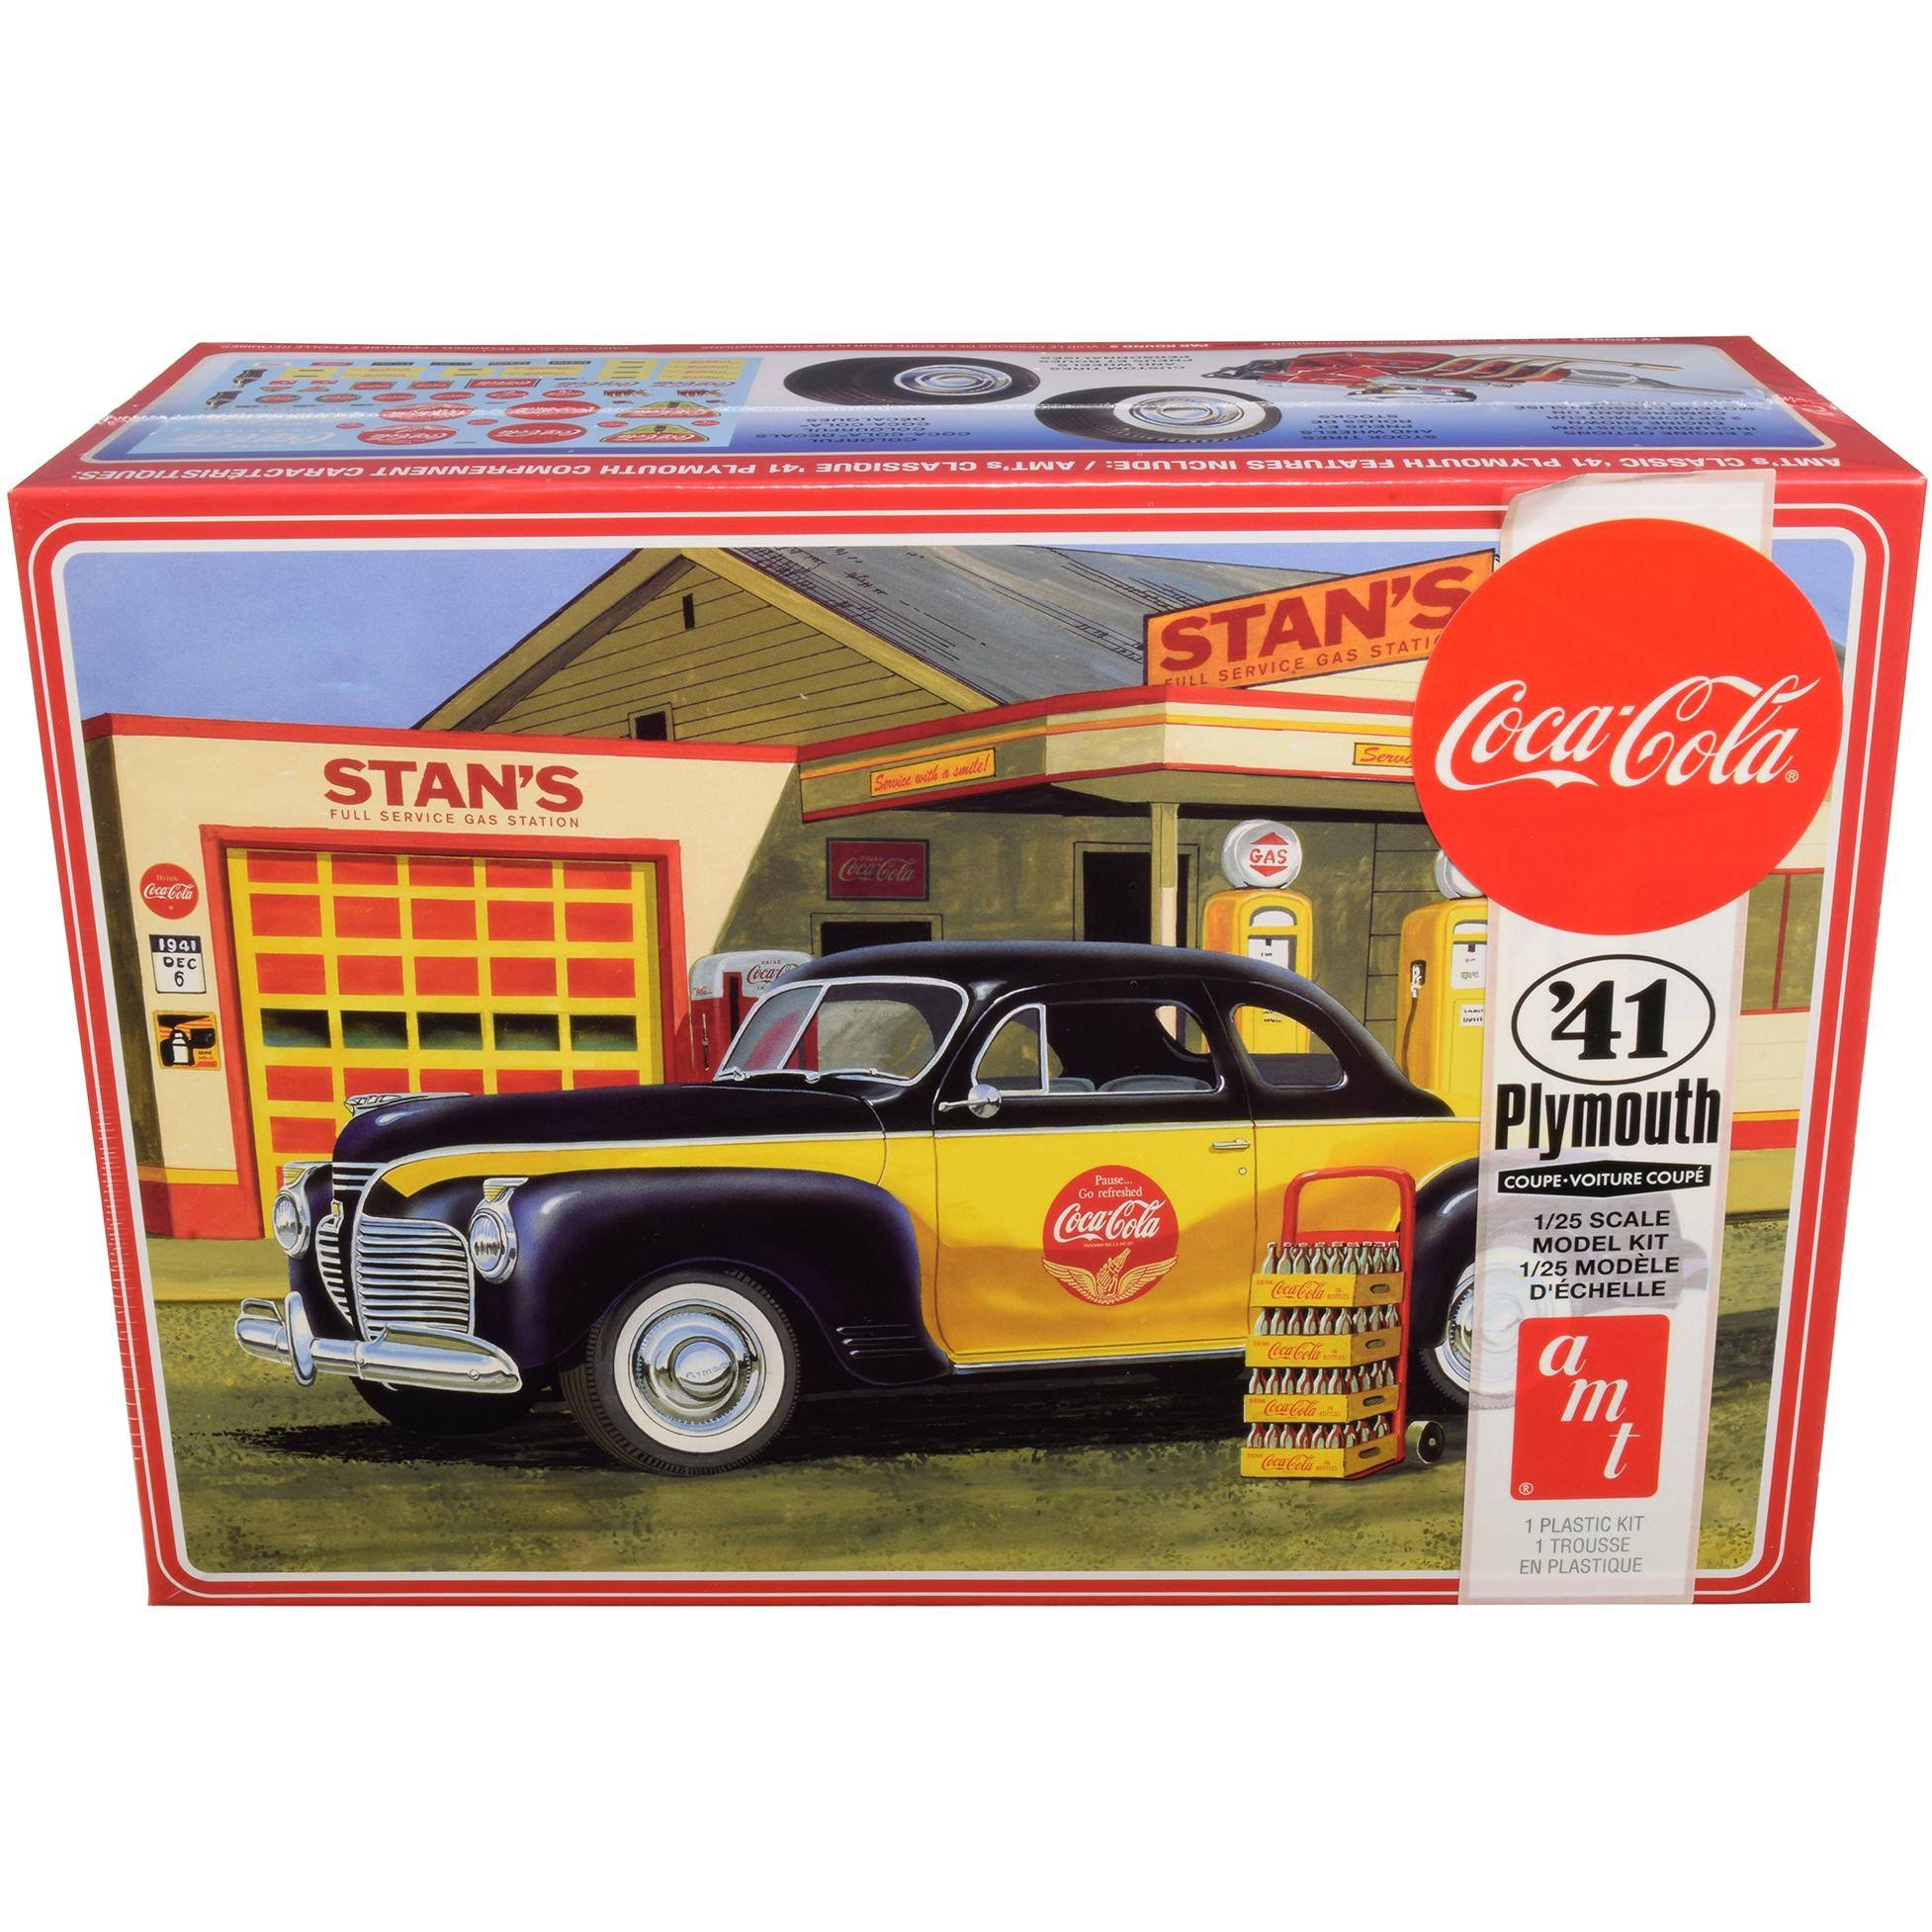 AMT 1/25 Scale Model Kit - Skill 3 1941 Plymouth Coupe 4 Bottle Crates Coca-Cola